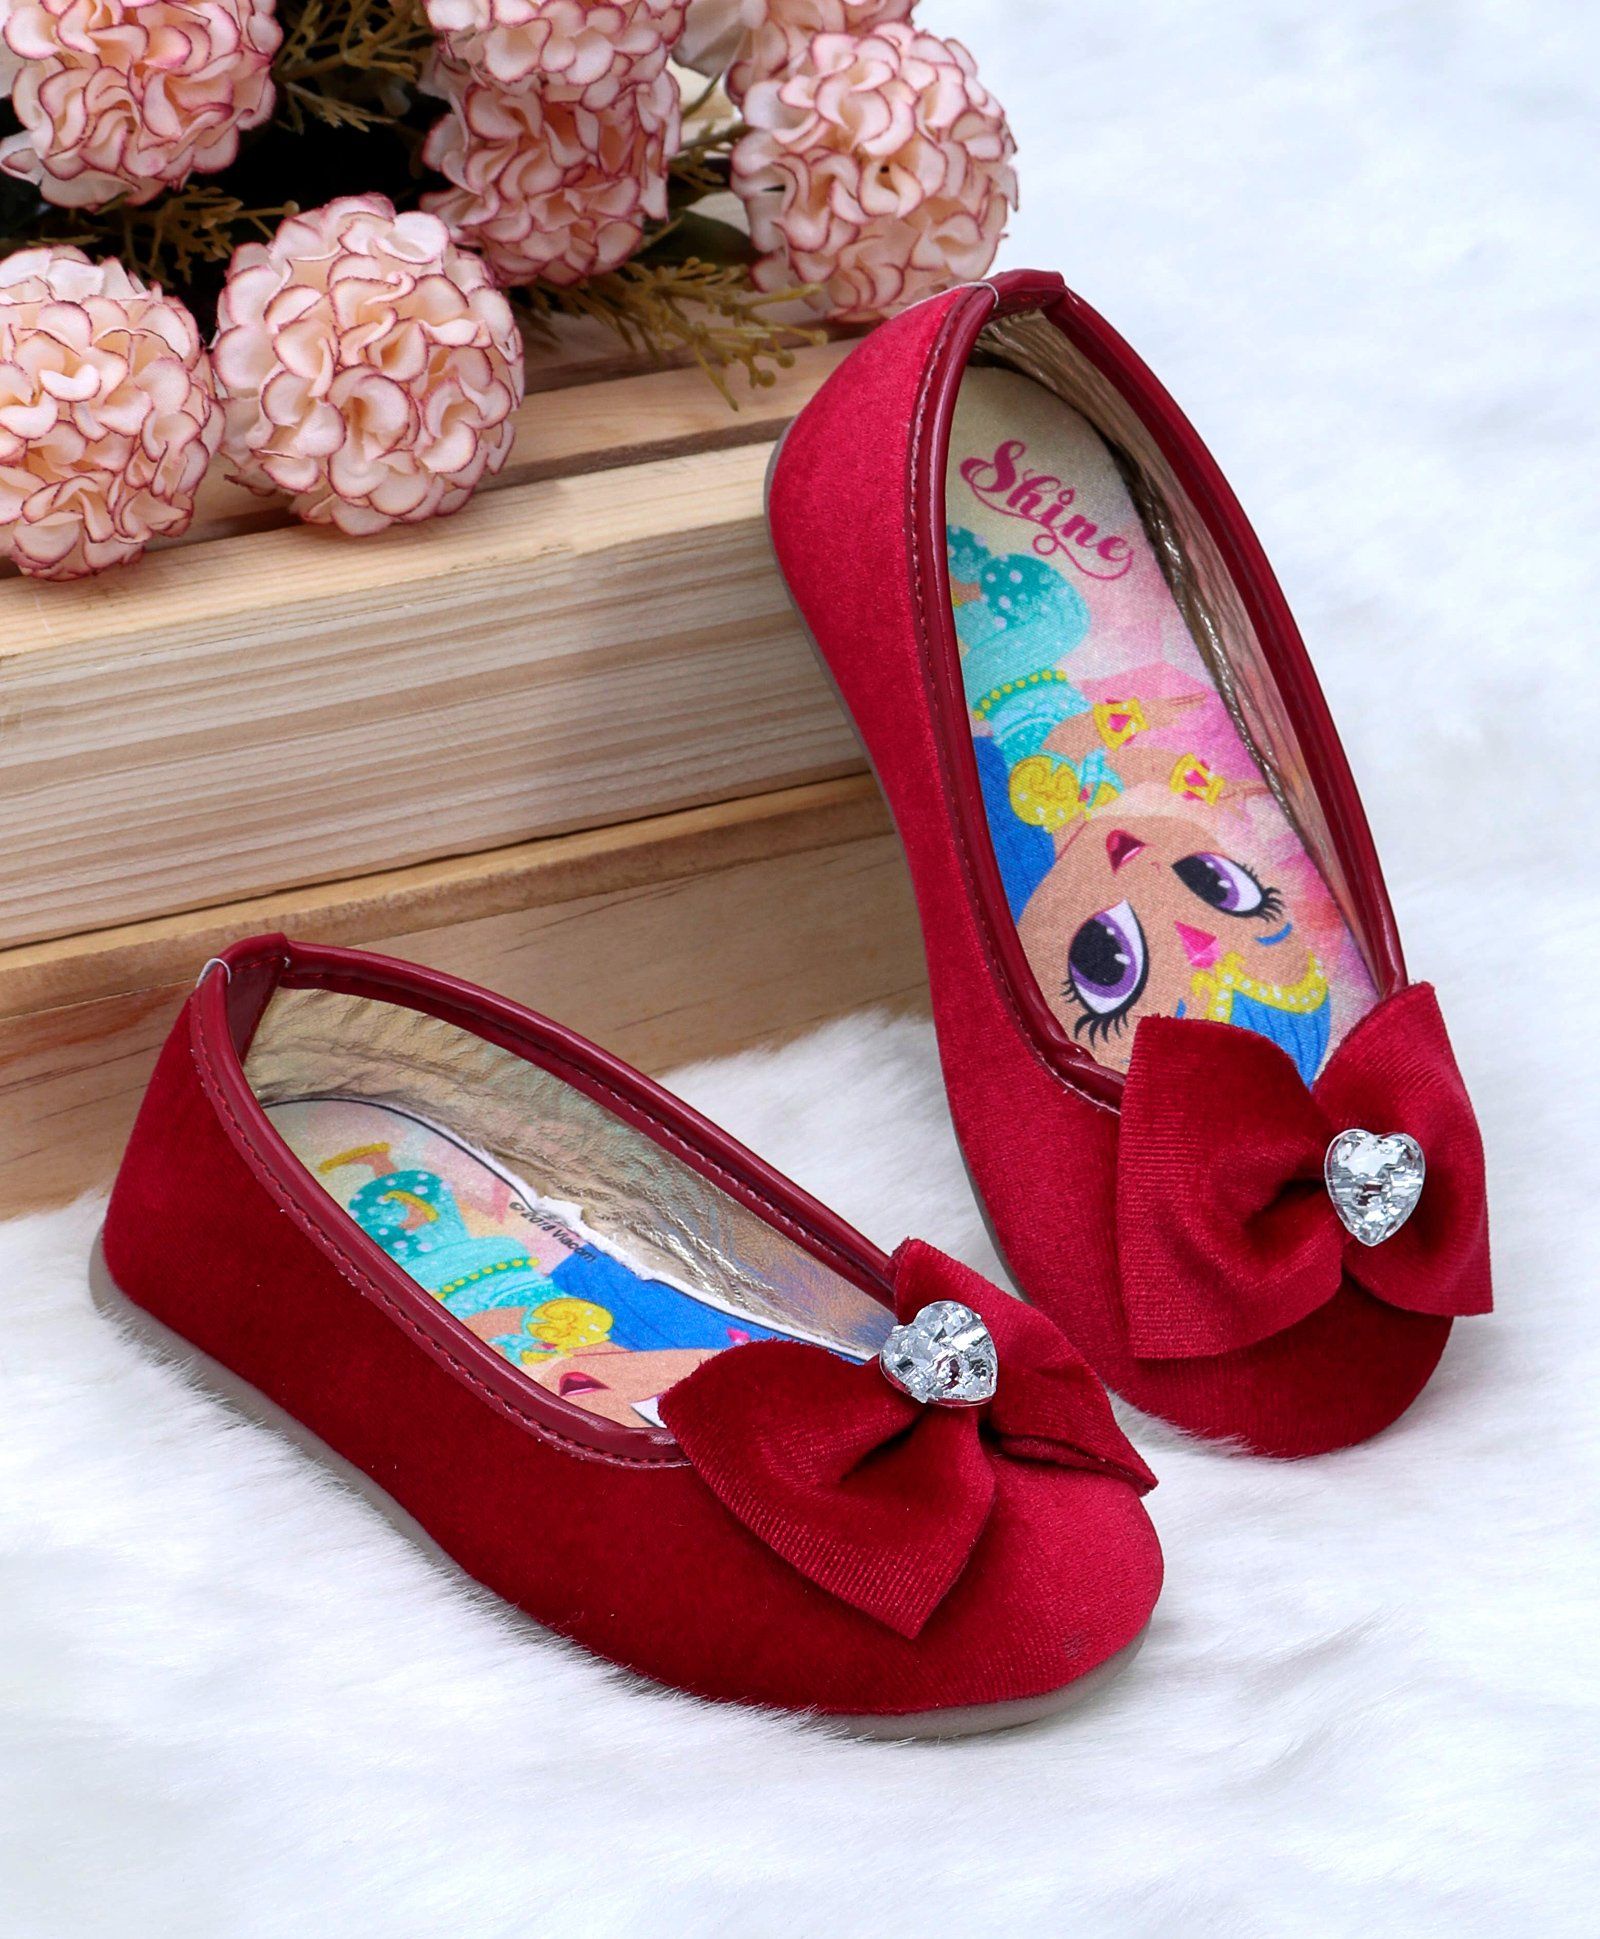 red belly shoes